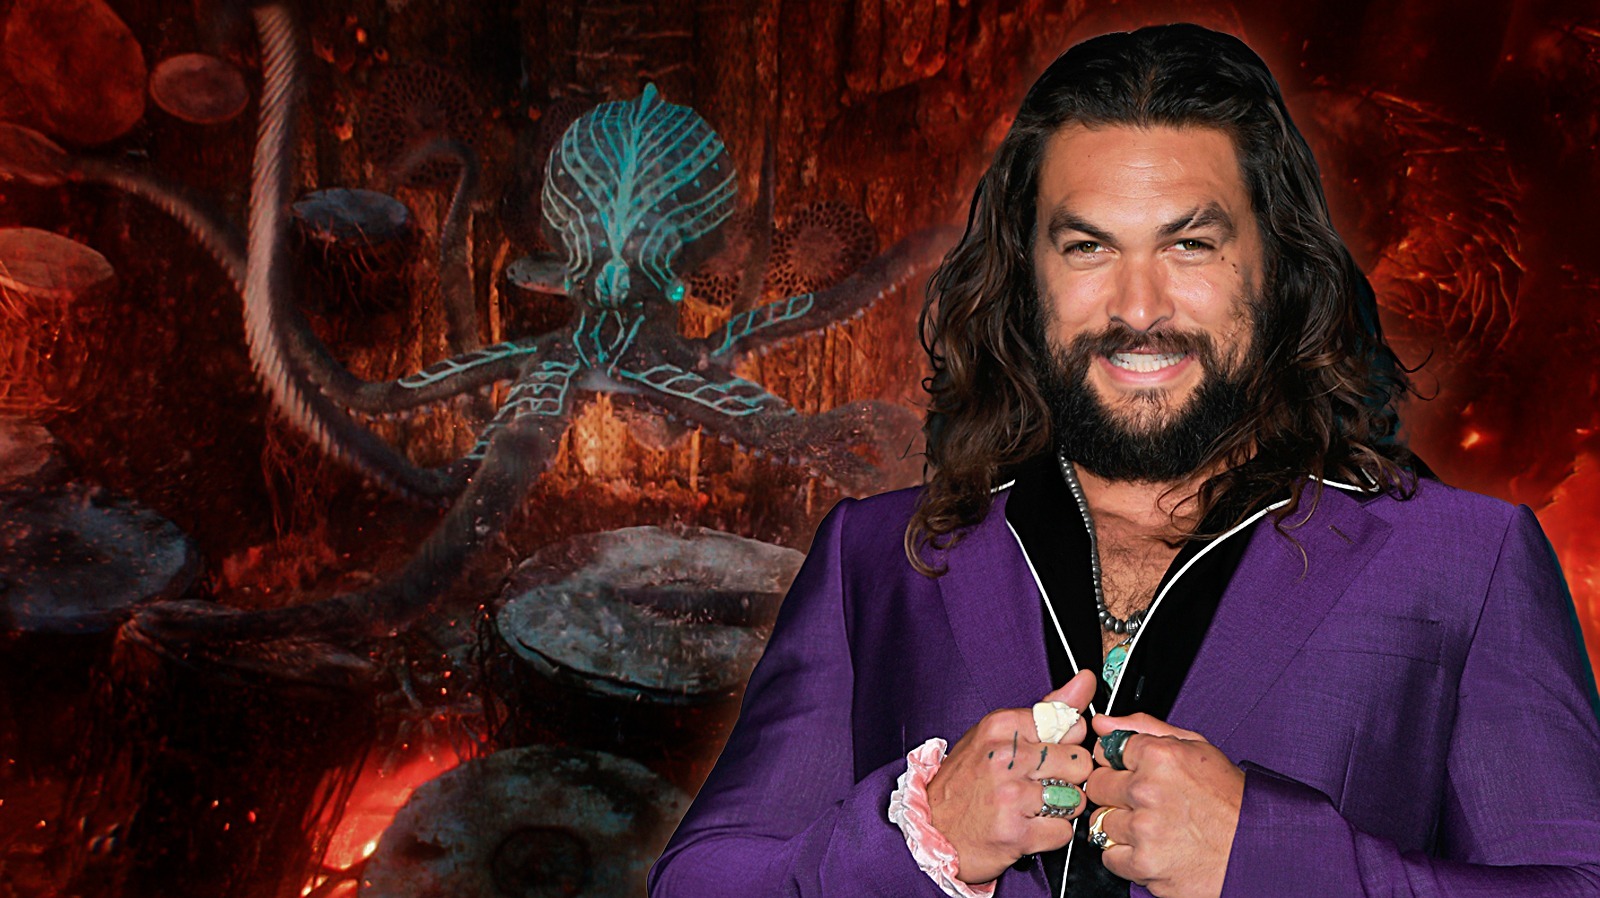 Aquaman 2 May Jump The Shark By Giving This Weird DC Character A Key Role